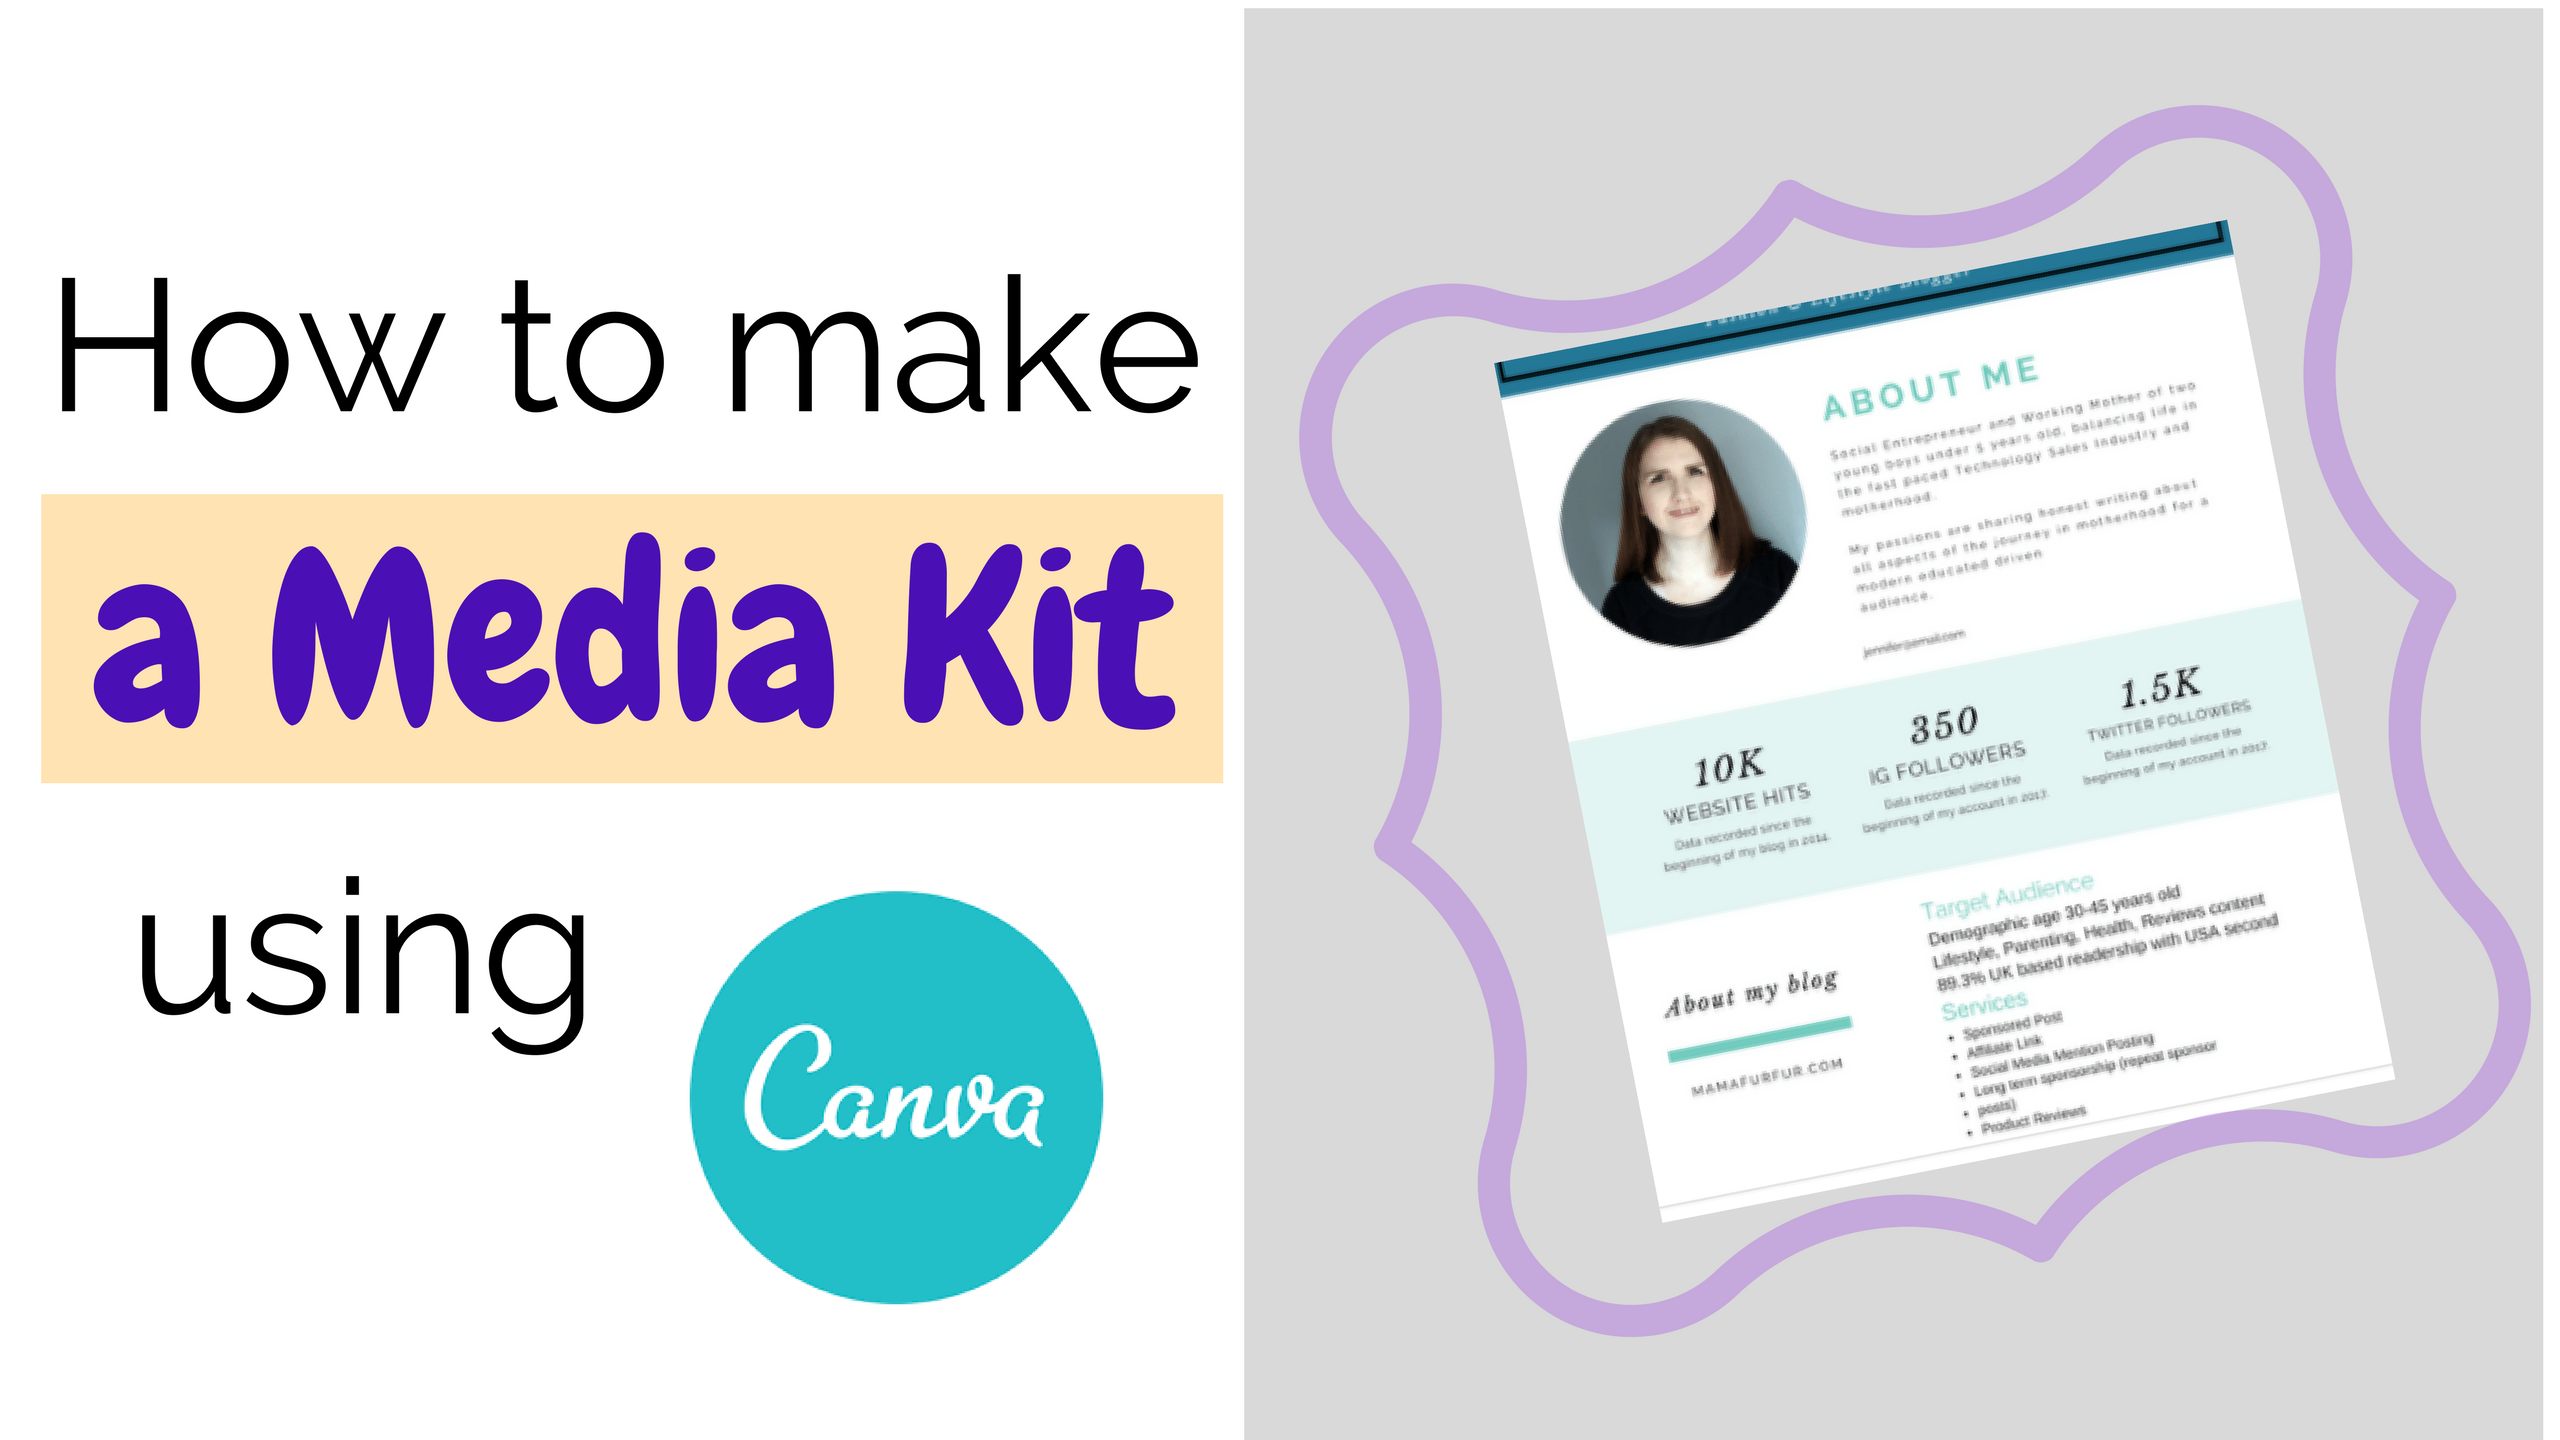 How to make a Media Kit using Canva for Blogs or Website ¦ Create a Media Kit in Canva